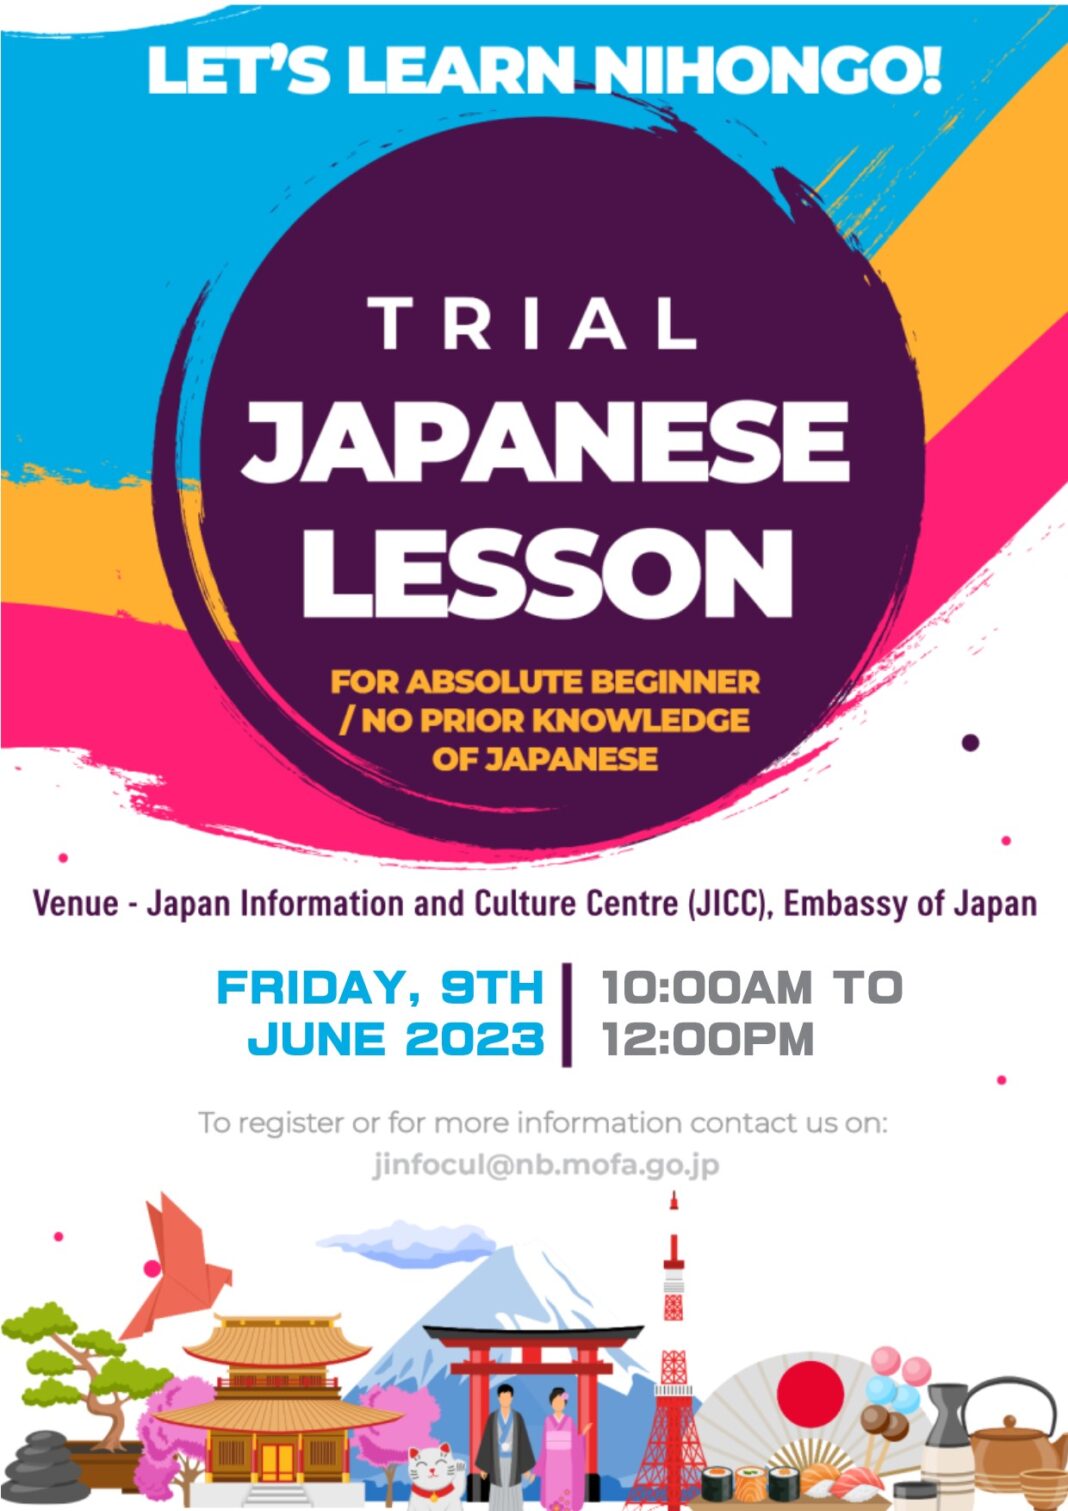 Japan Embassy shares schedule of Trail Japanese Lessons in Kenya